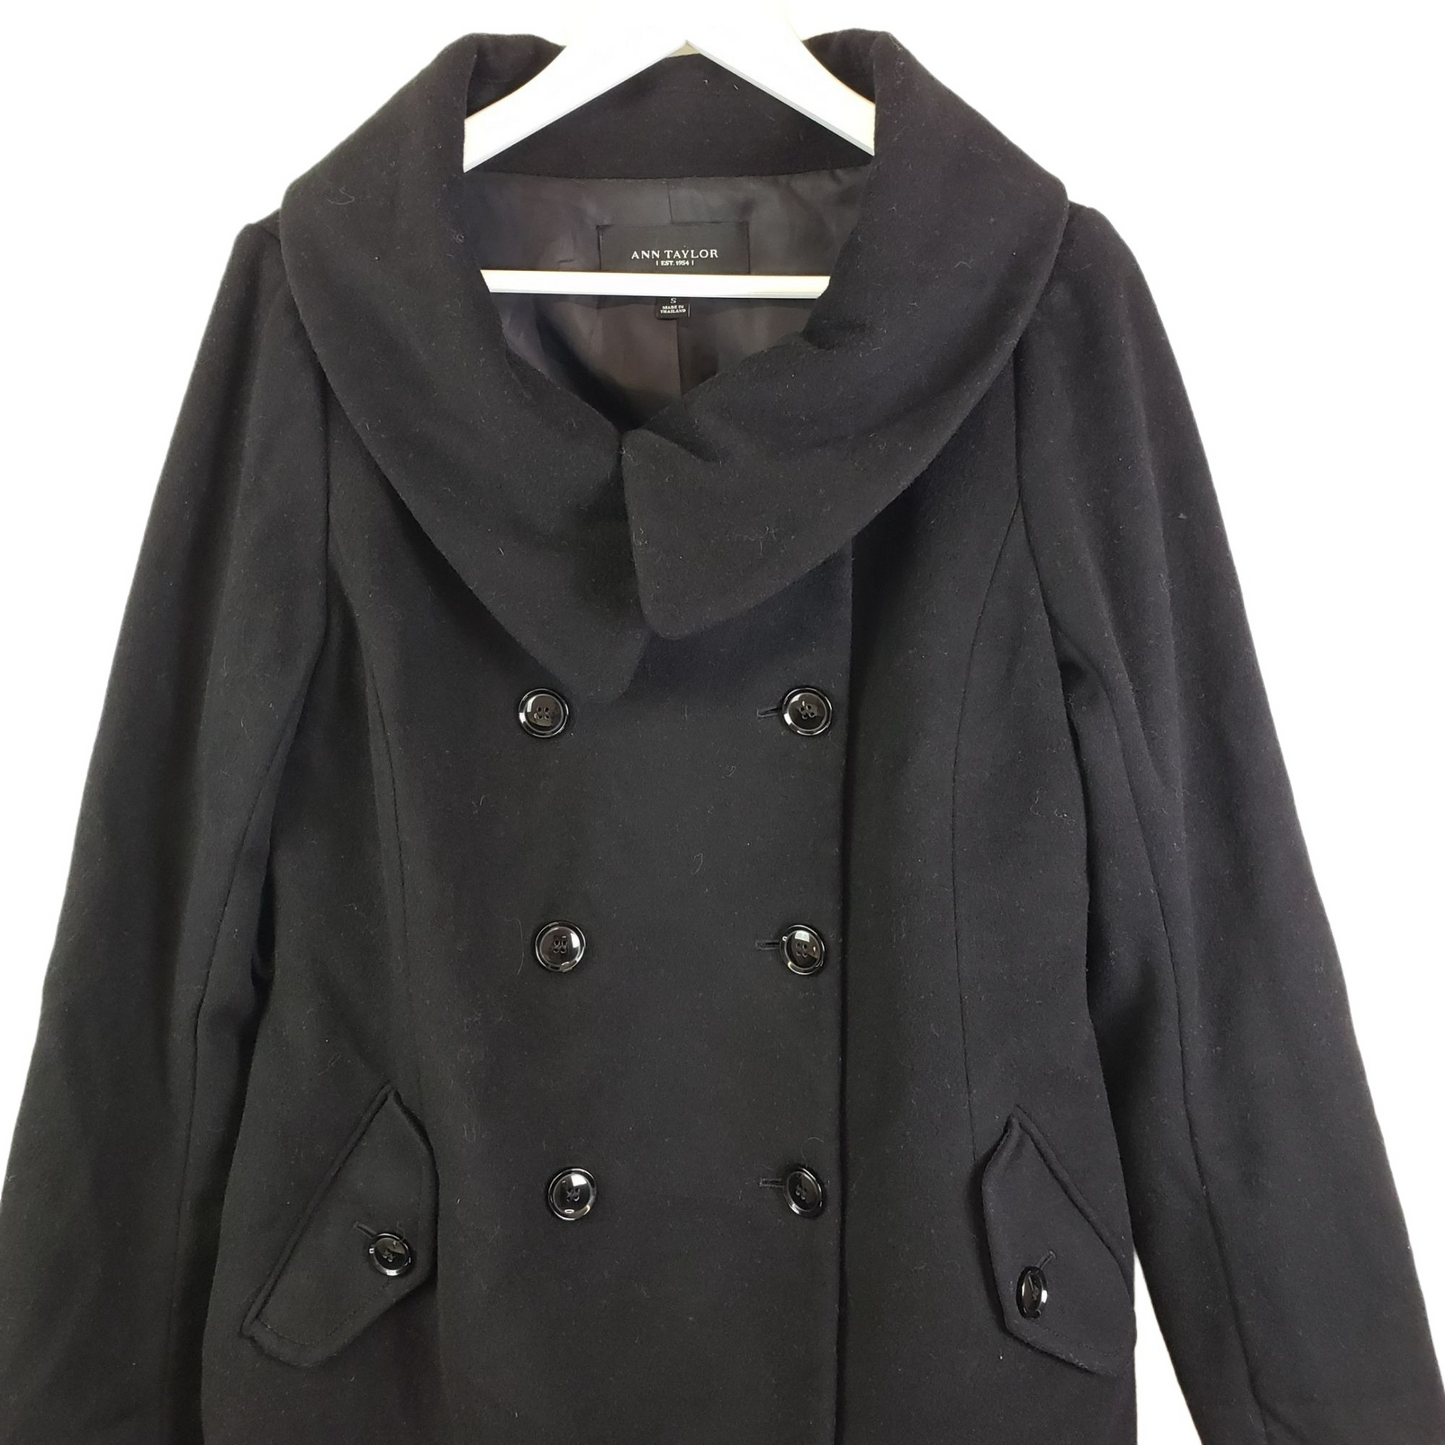 Ann Taylor Wool Blend Peacoat Size Small *Missing Belt*